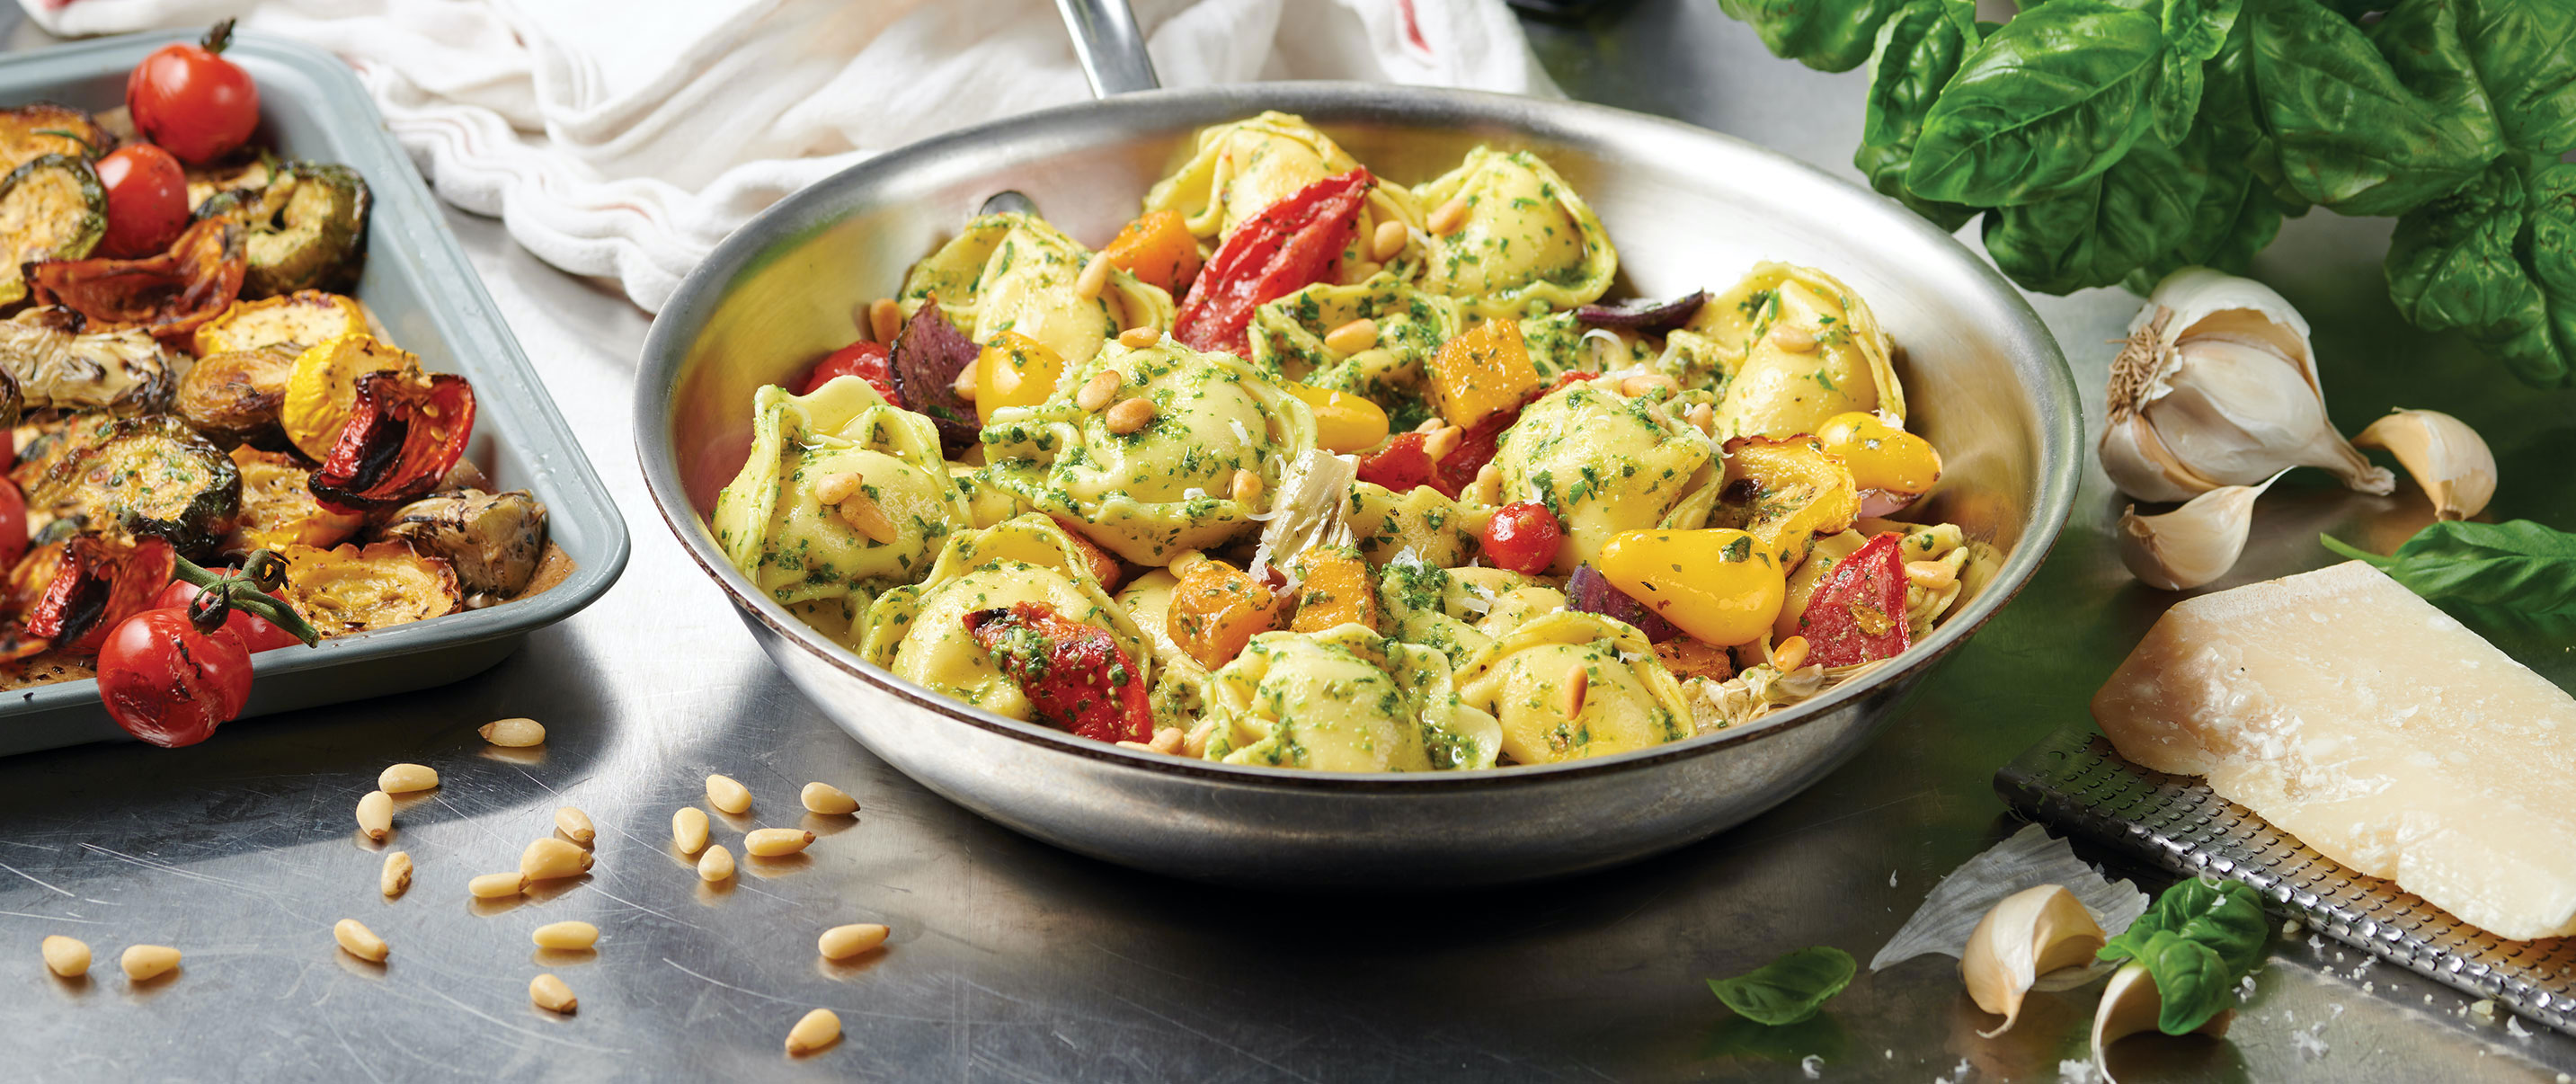 tortellini pasta with roasted vegetables